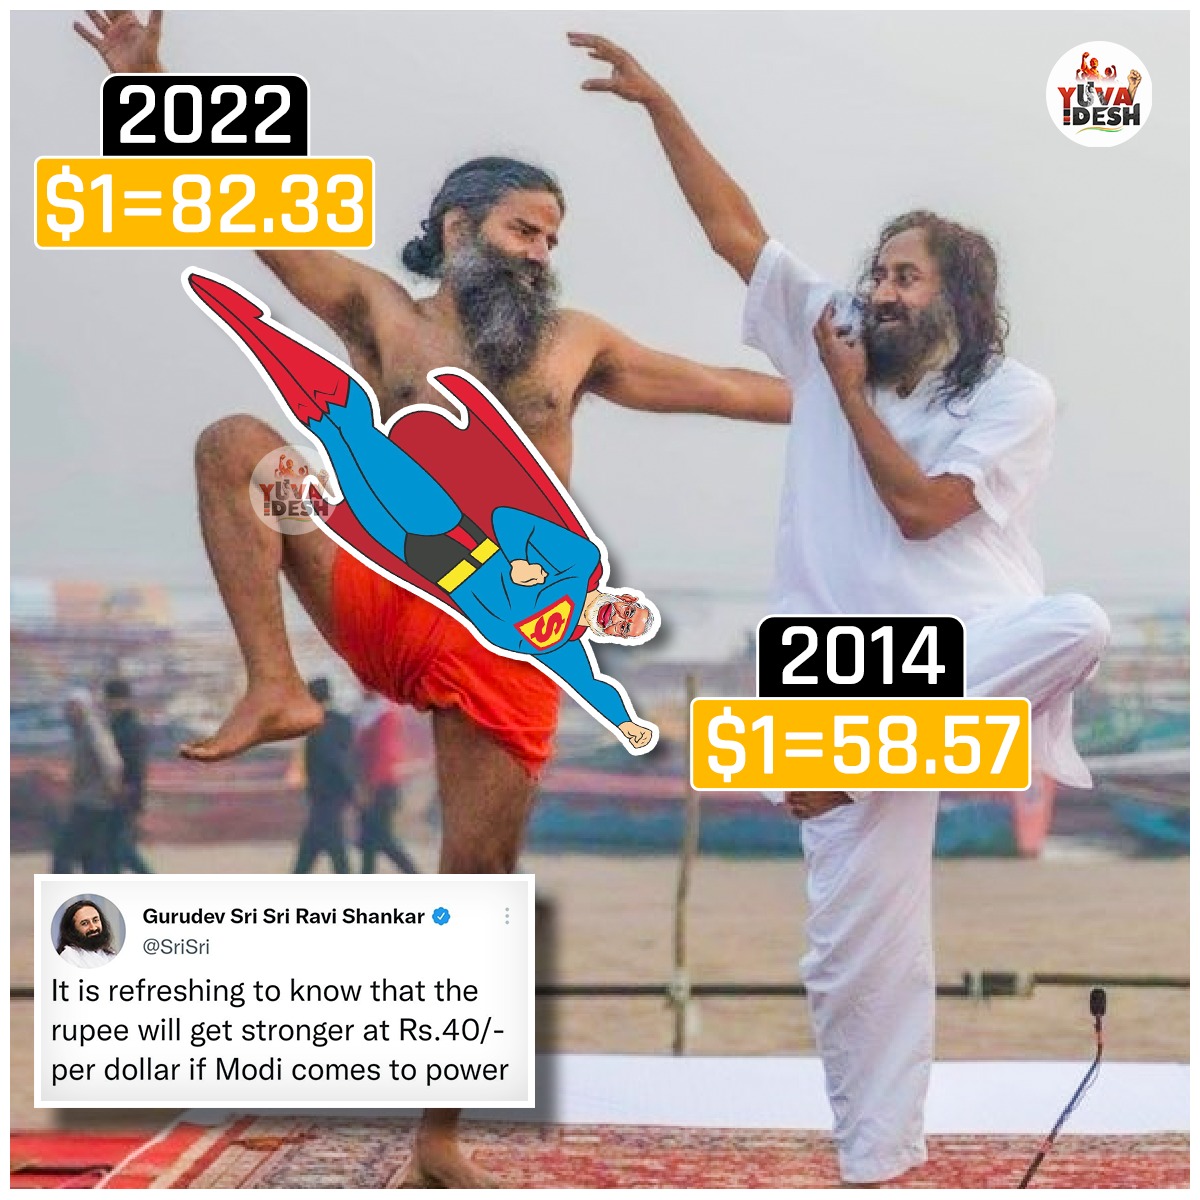 1 Dollar = Rs 83/- It is refreshing to know that @SriSri is a Spineless Sycophant of Modi. #BharatJodoYatra 🇮🇳